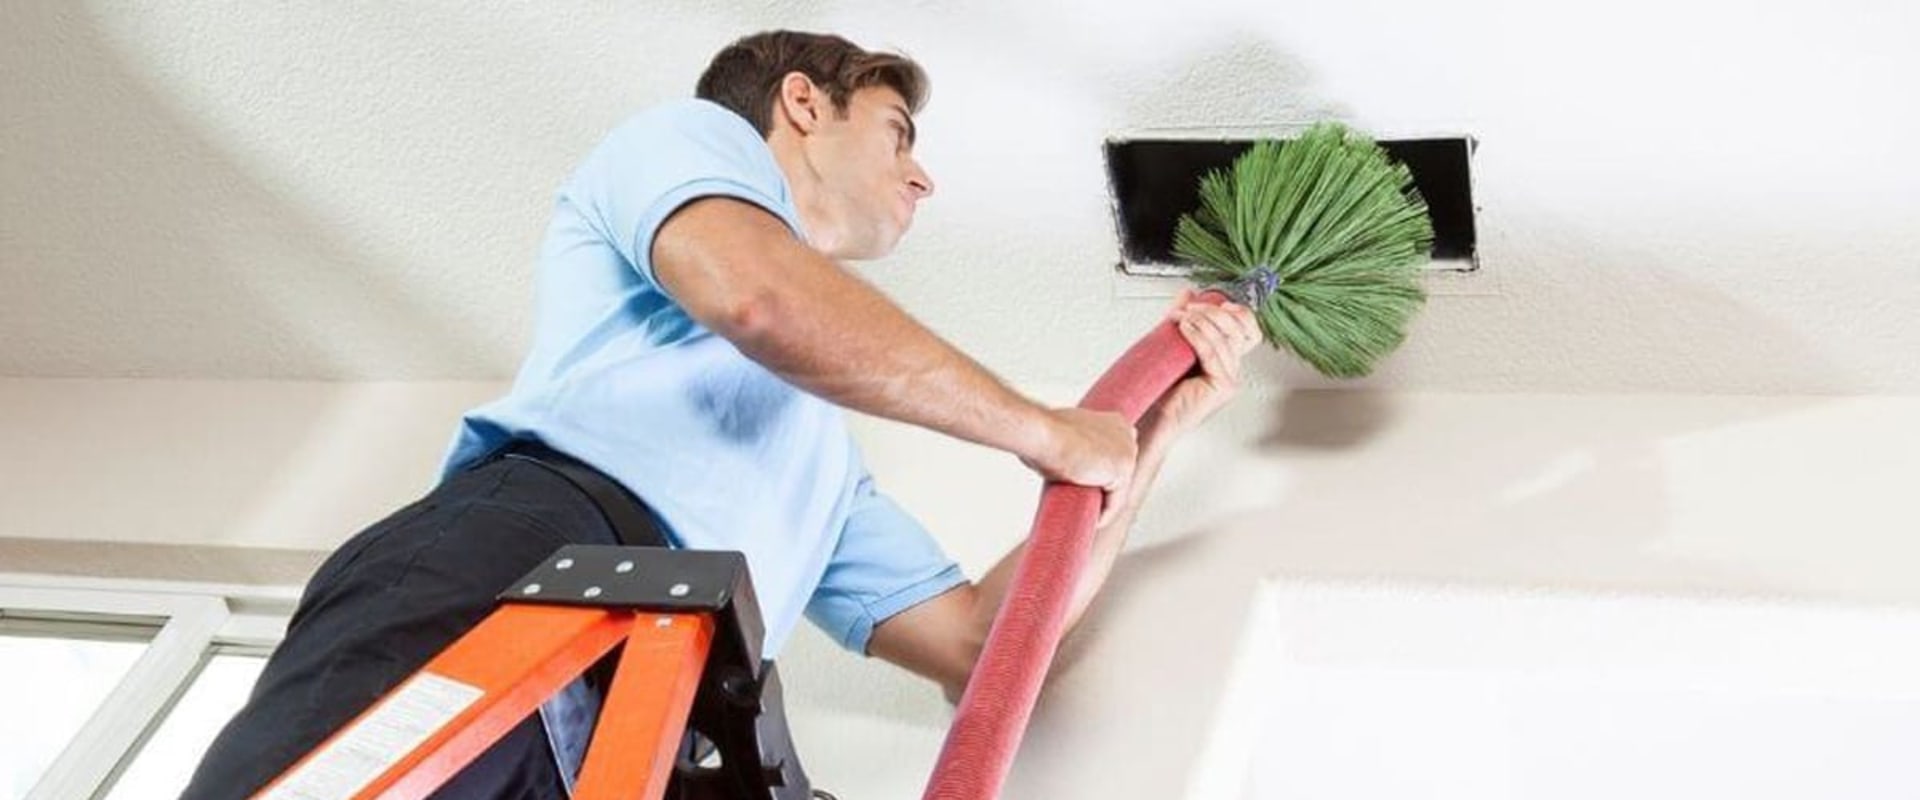 Professional Air Duct Cleaning Service: Cost and Quality